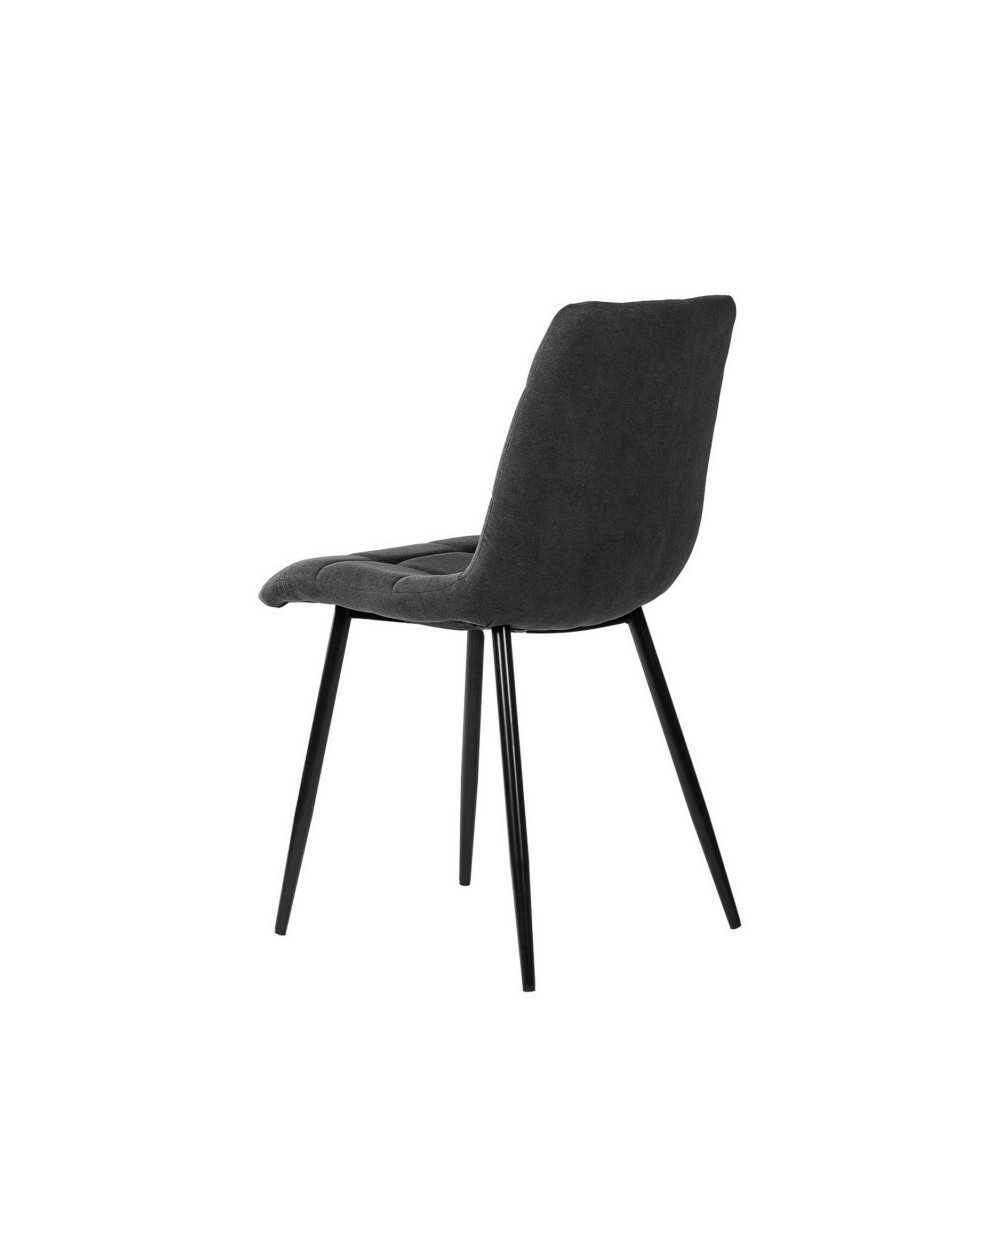 Roterdão Armchair DUDECO - Structure - Palissandro wood
Base in black lacquered aluminum
High density foam padding
Upholstere